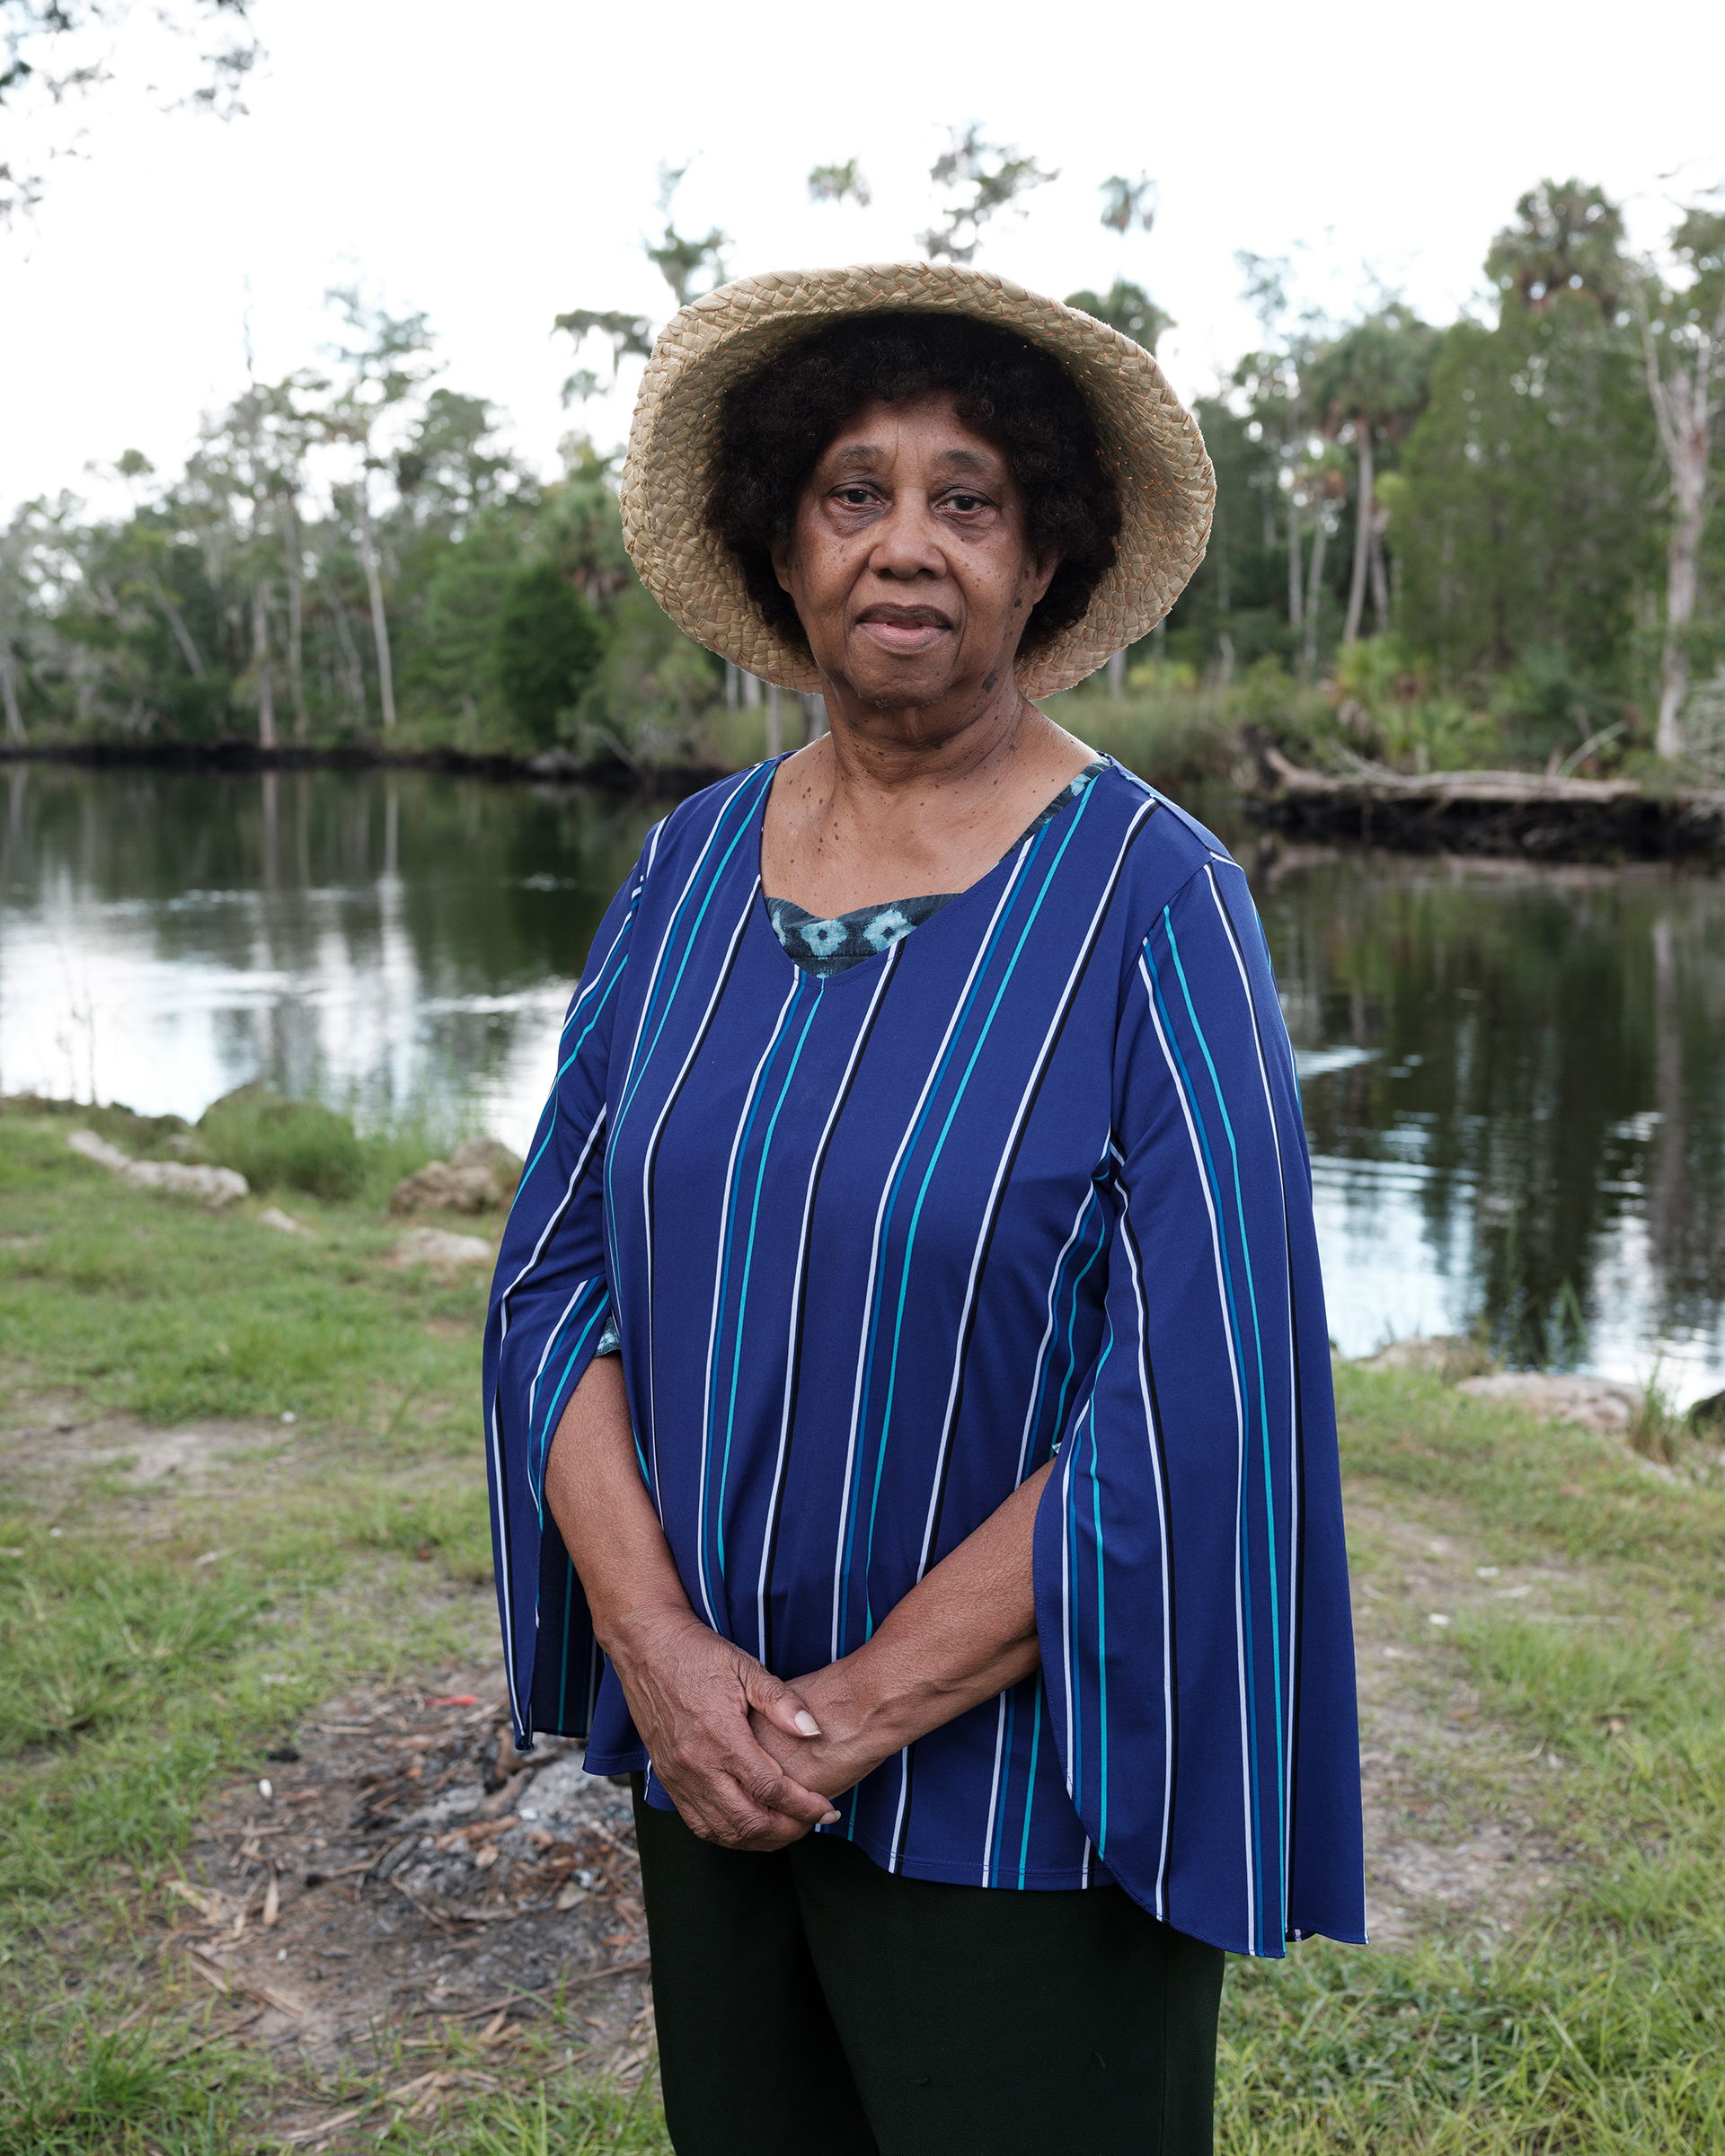 "They didn’t get a chance to go on any big cruises and enjoy and have fun," says Sherry DuPree, a historian for the Rosewood Heritage Foundation. "They had to pay money out to take care of their needs." (Rahim Fortune for TIME)